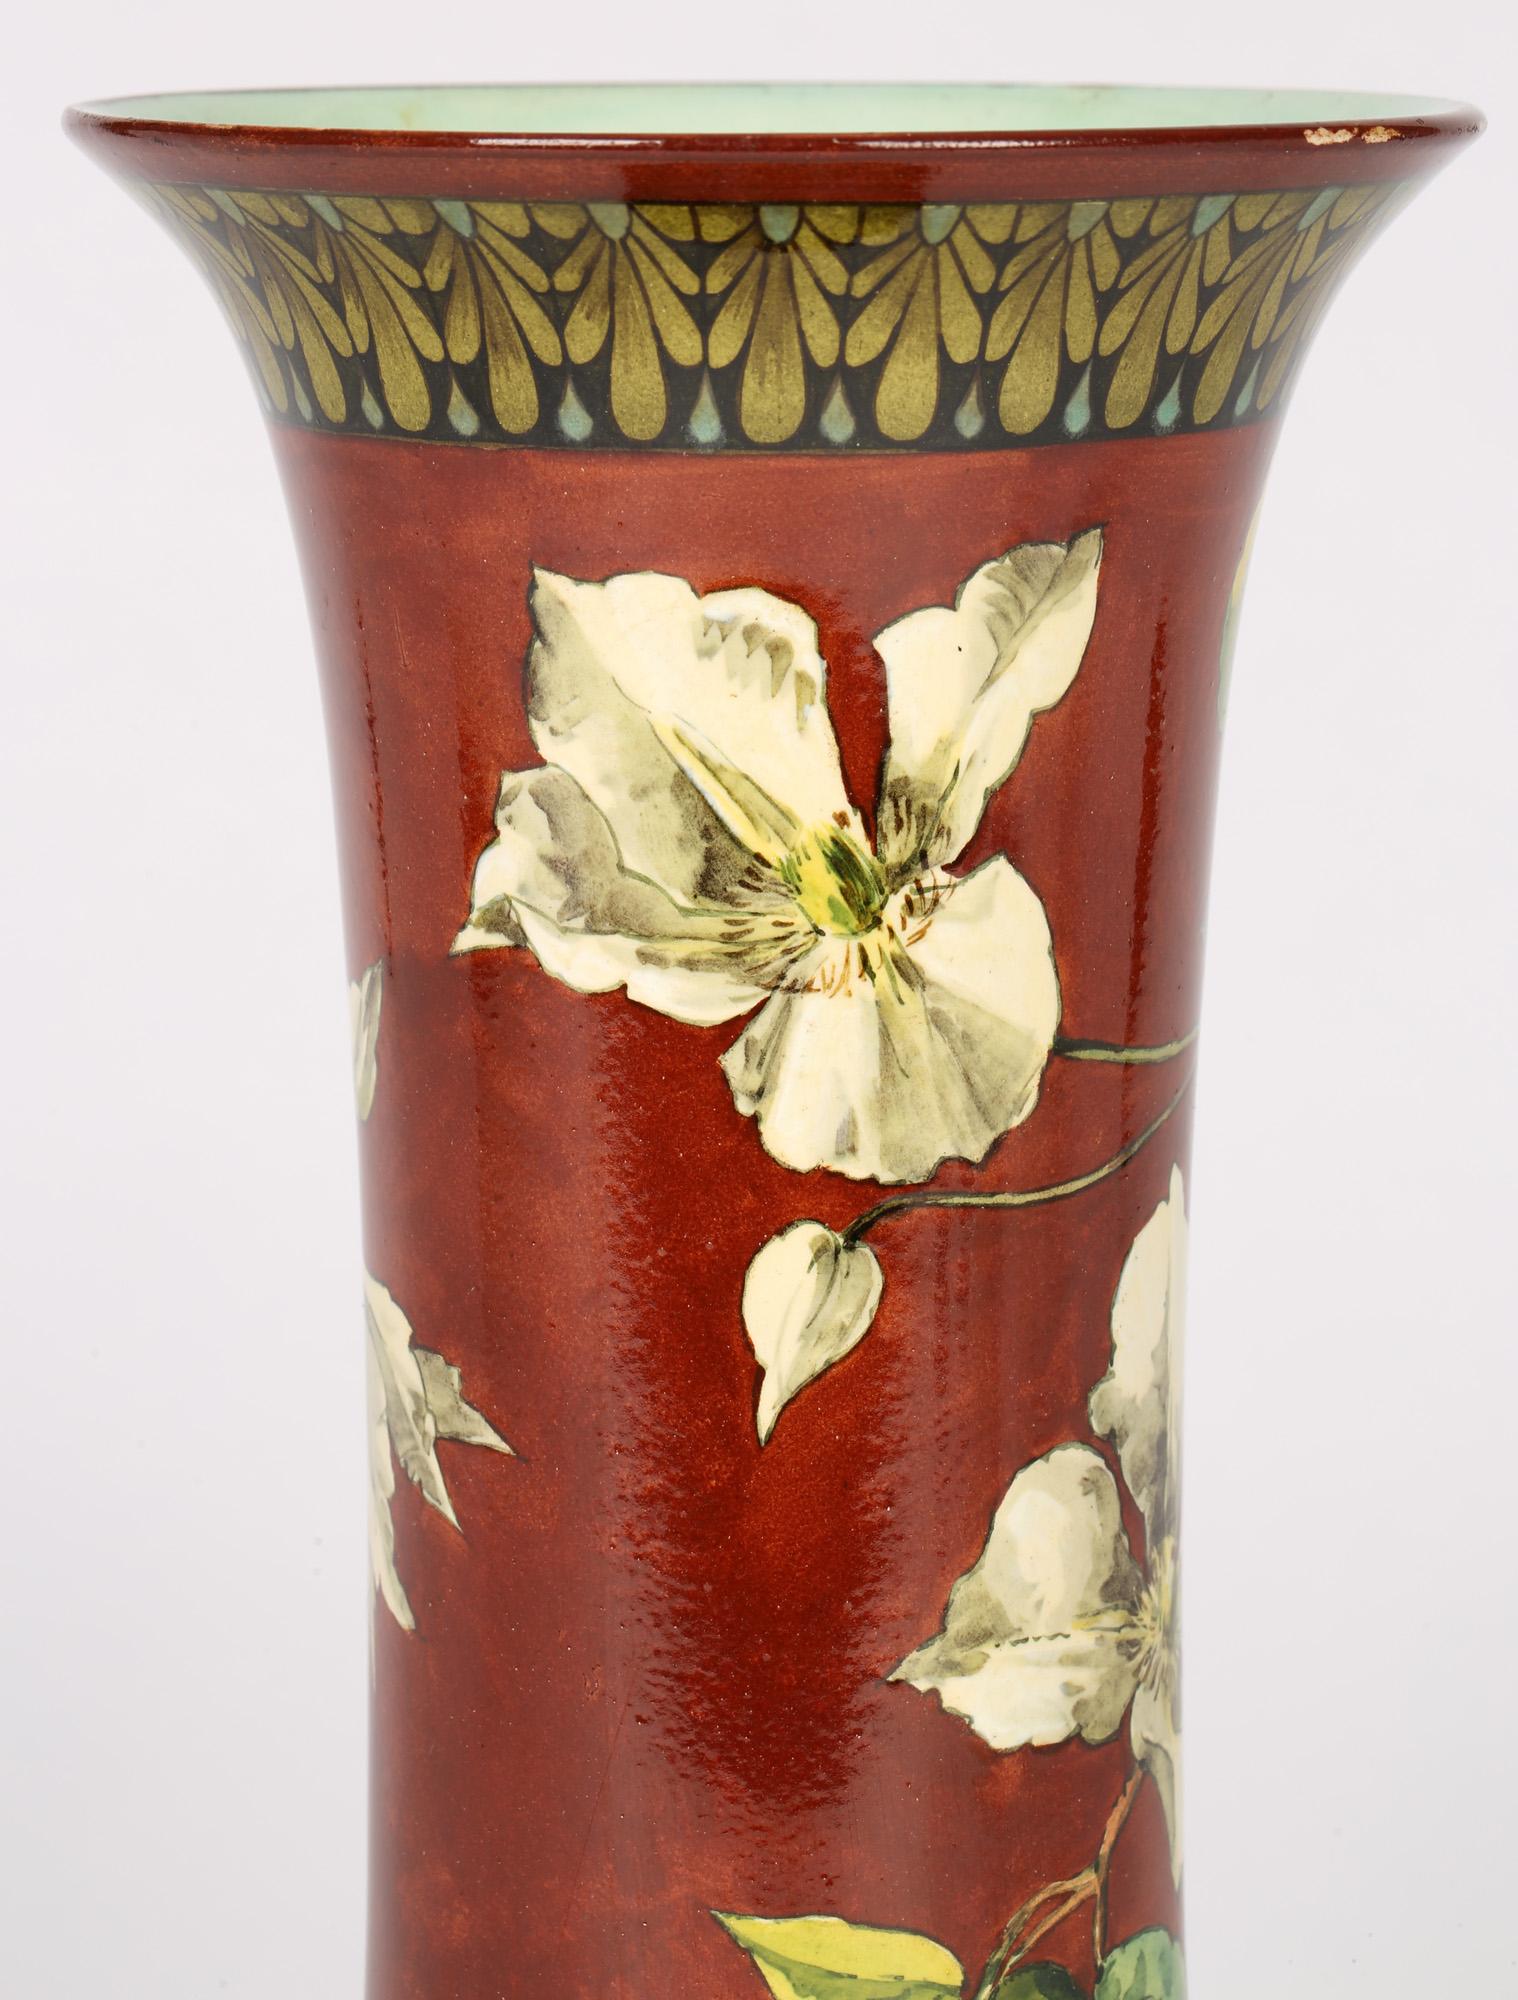 An exquisitely hand painted Doulton Lambeth Faience art pottery vase with trailing flowering stems by Helen A Harding and dating between 1877 and 1884. The tall elegant rounded cylindrical bodied vase has a wide rounded skirted base with a trumpet